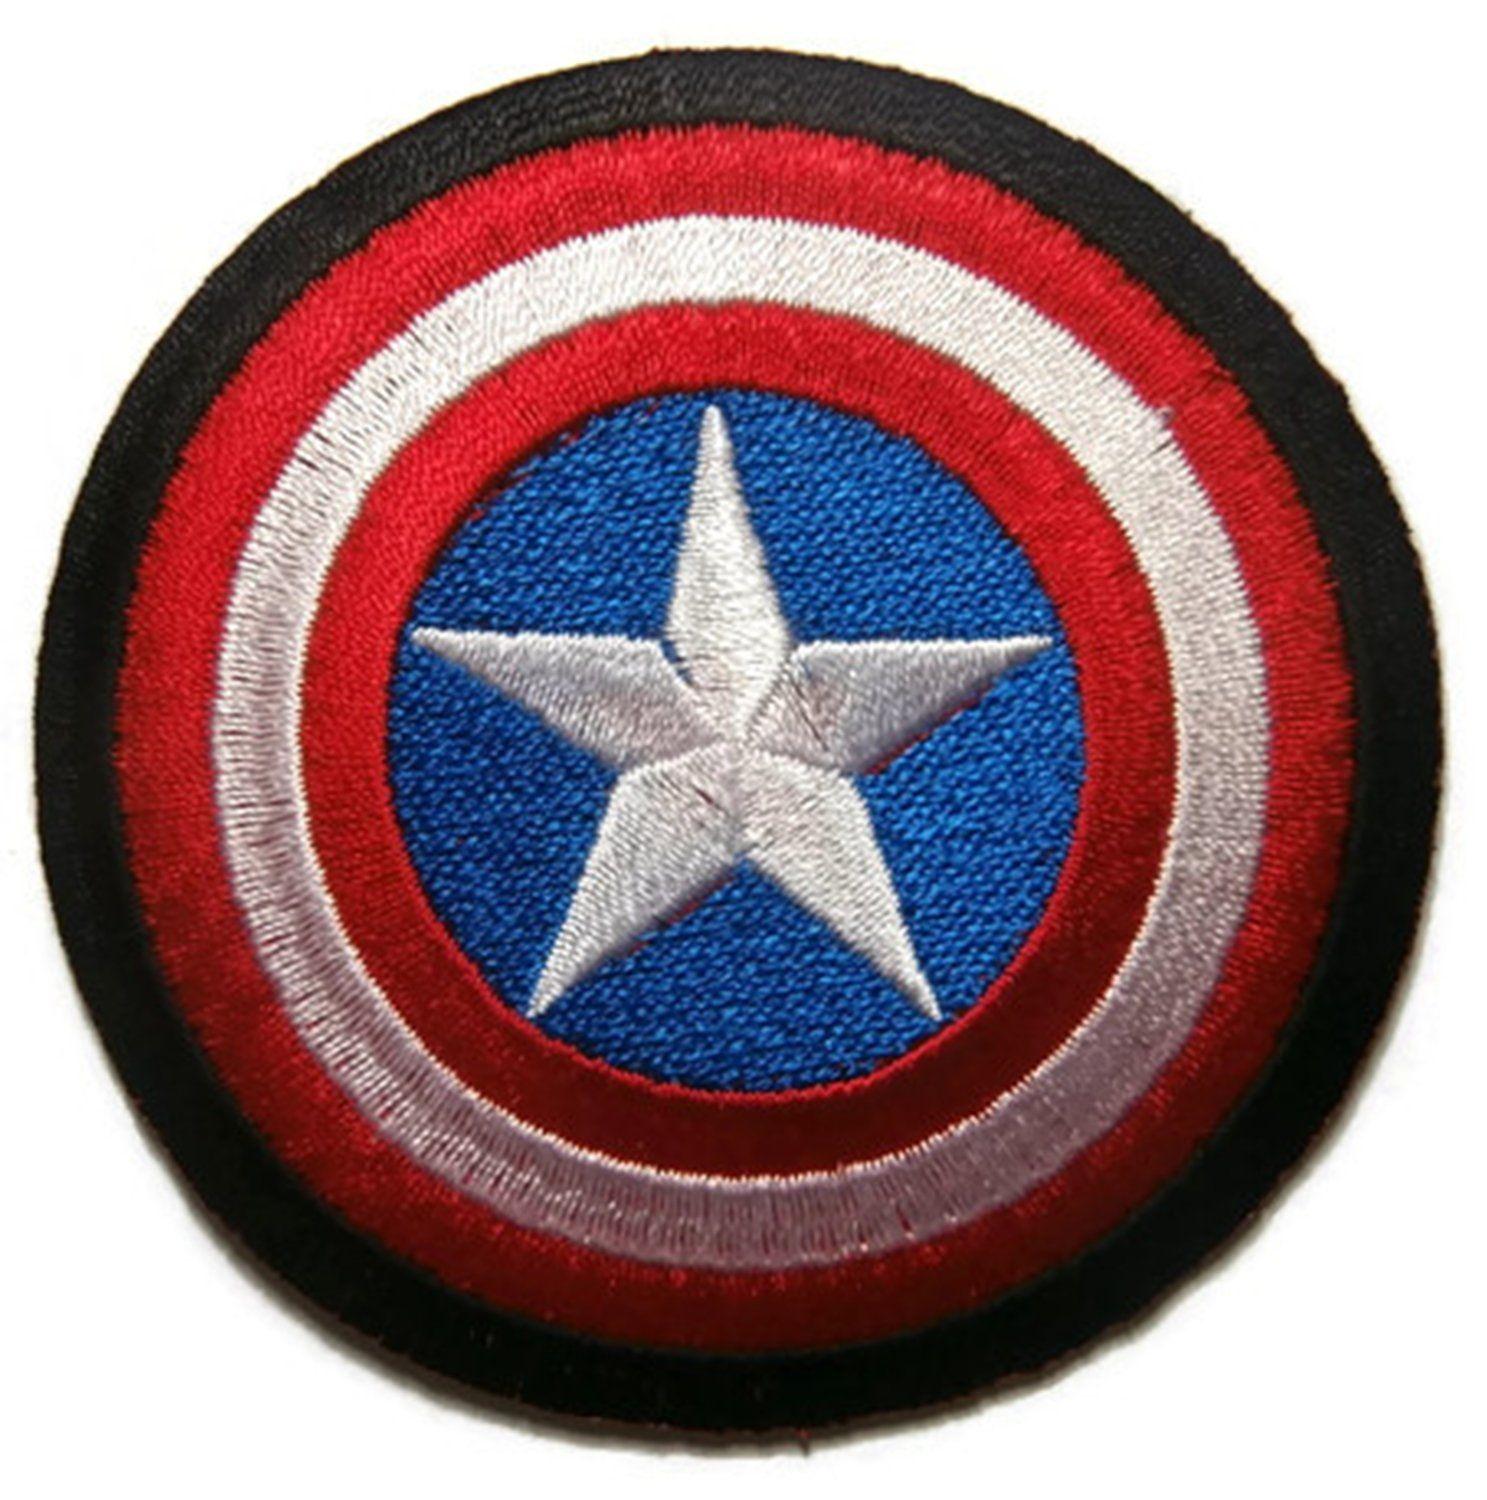 Avengers Shield Logo - Amazon.com: captain america patch iron on Sew on Embroidered Patch ...